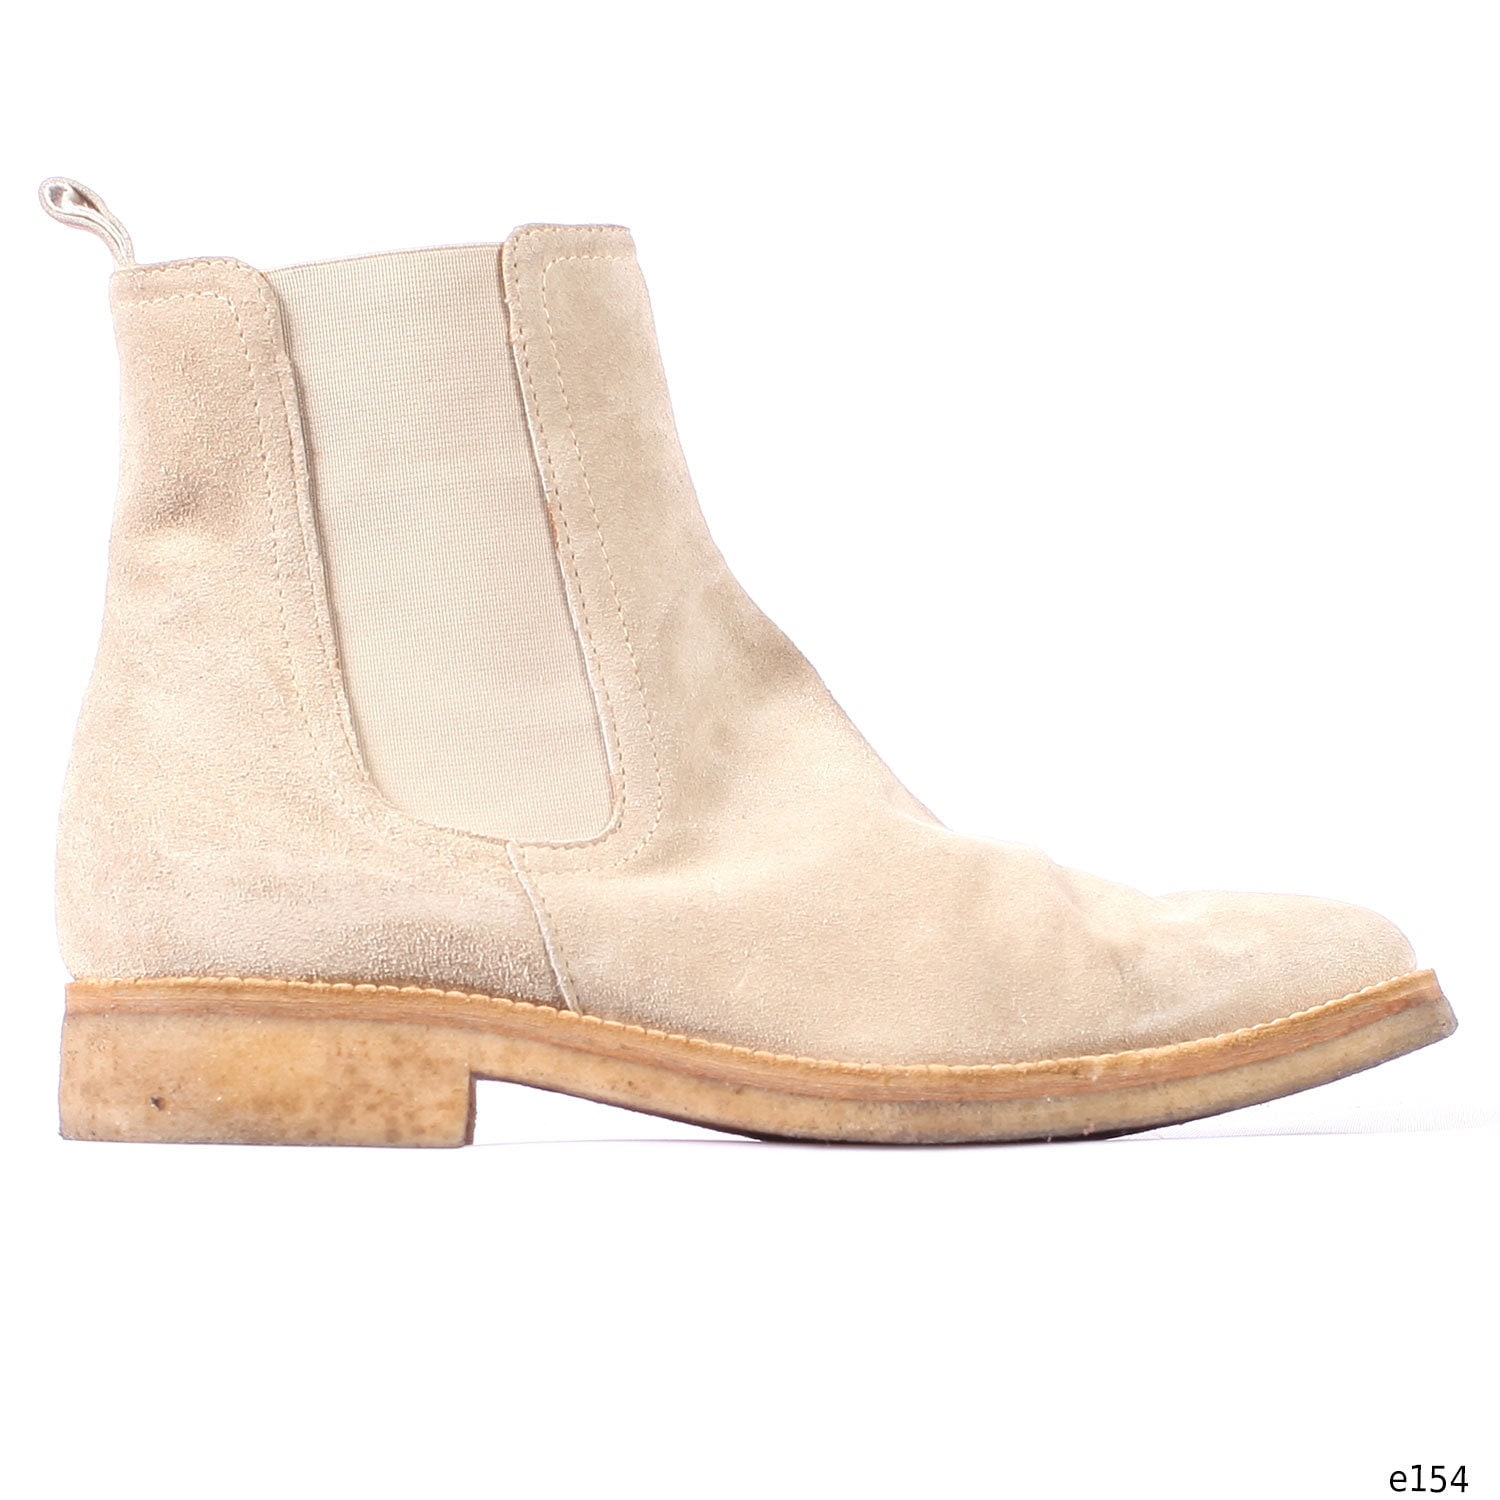 CHELSEA Boots . Beige Suede Vintage Ankle Bally Hipster Autumn